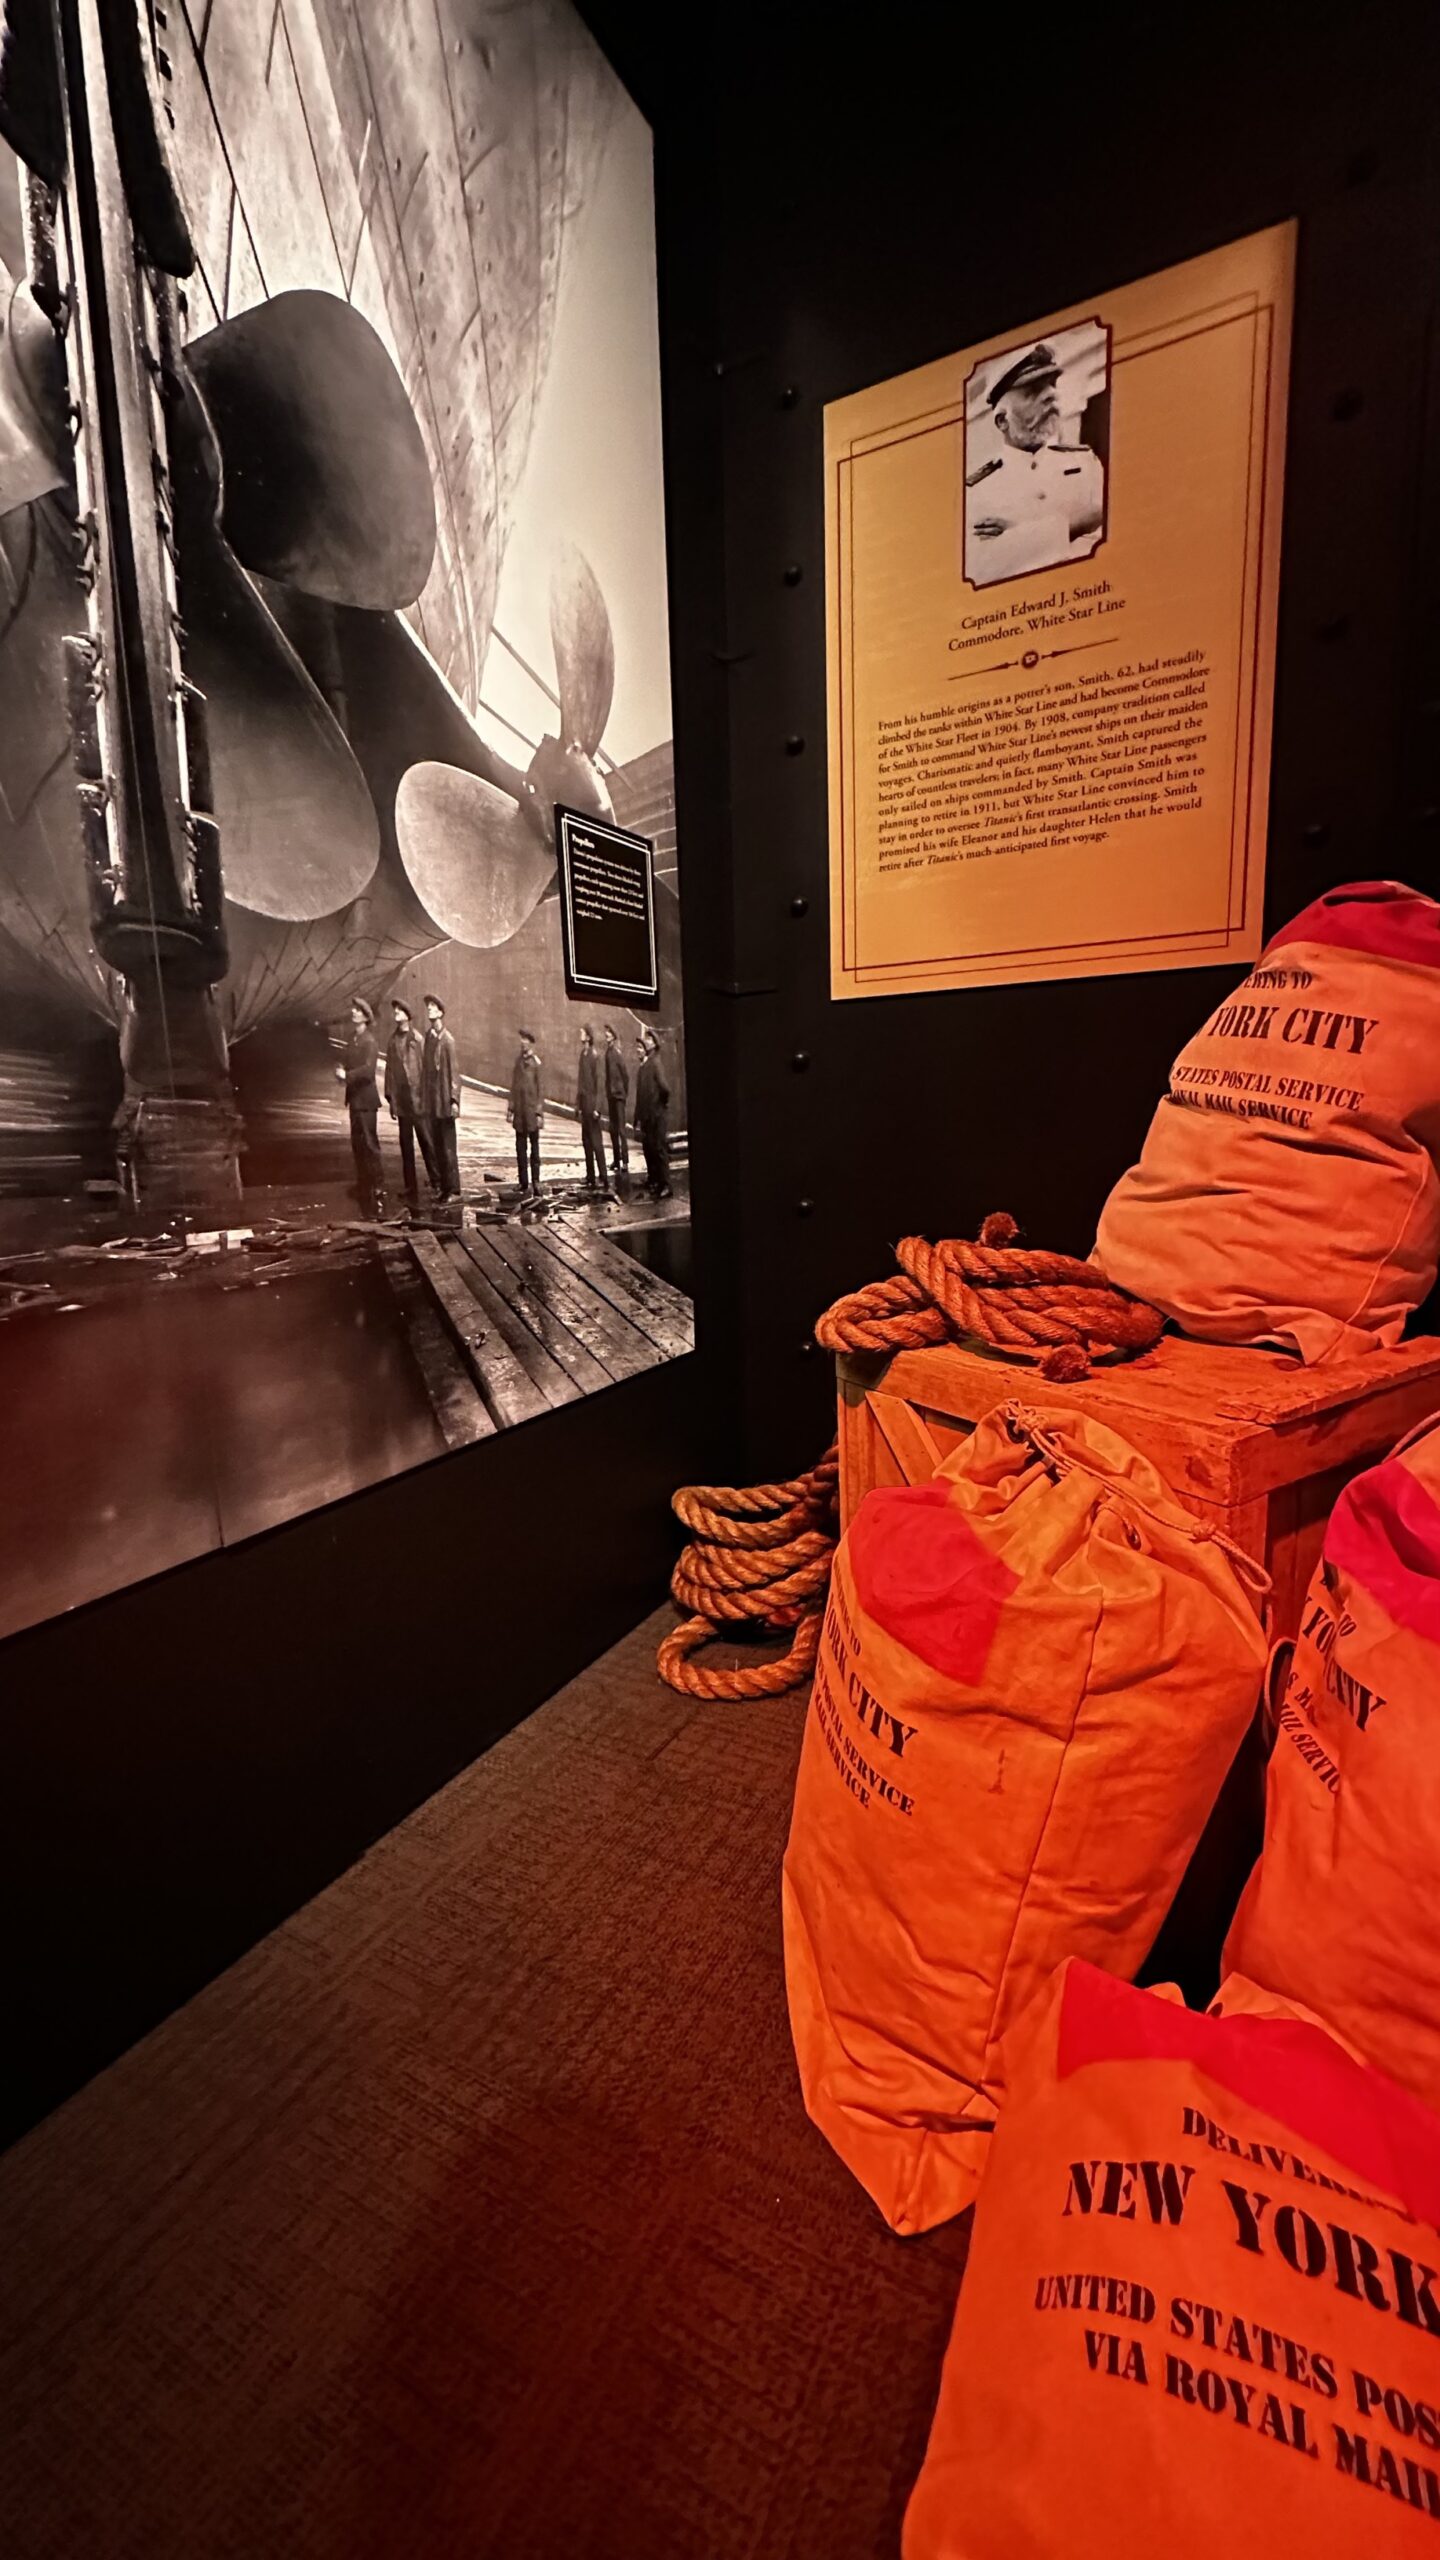 A photo of an area of the exhibit about the exterior of the ship.